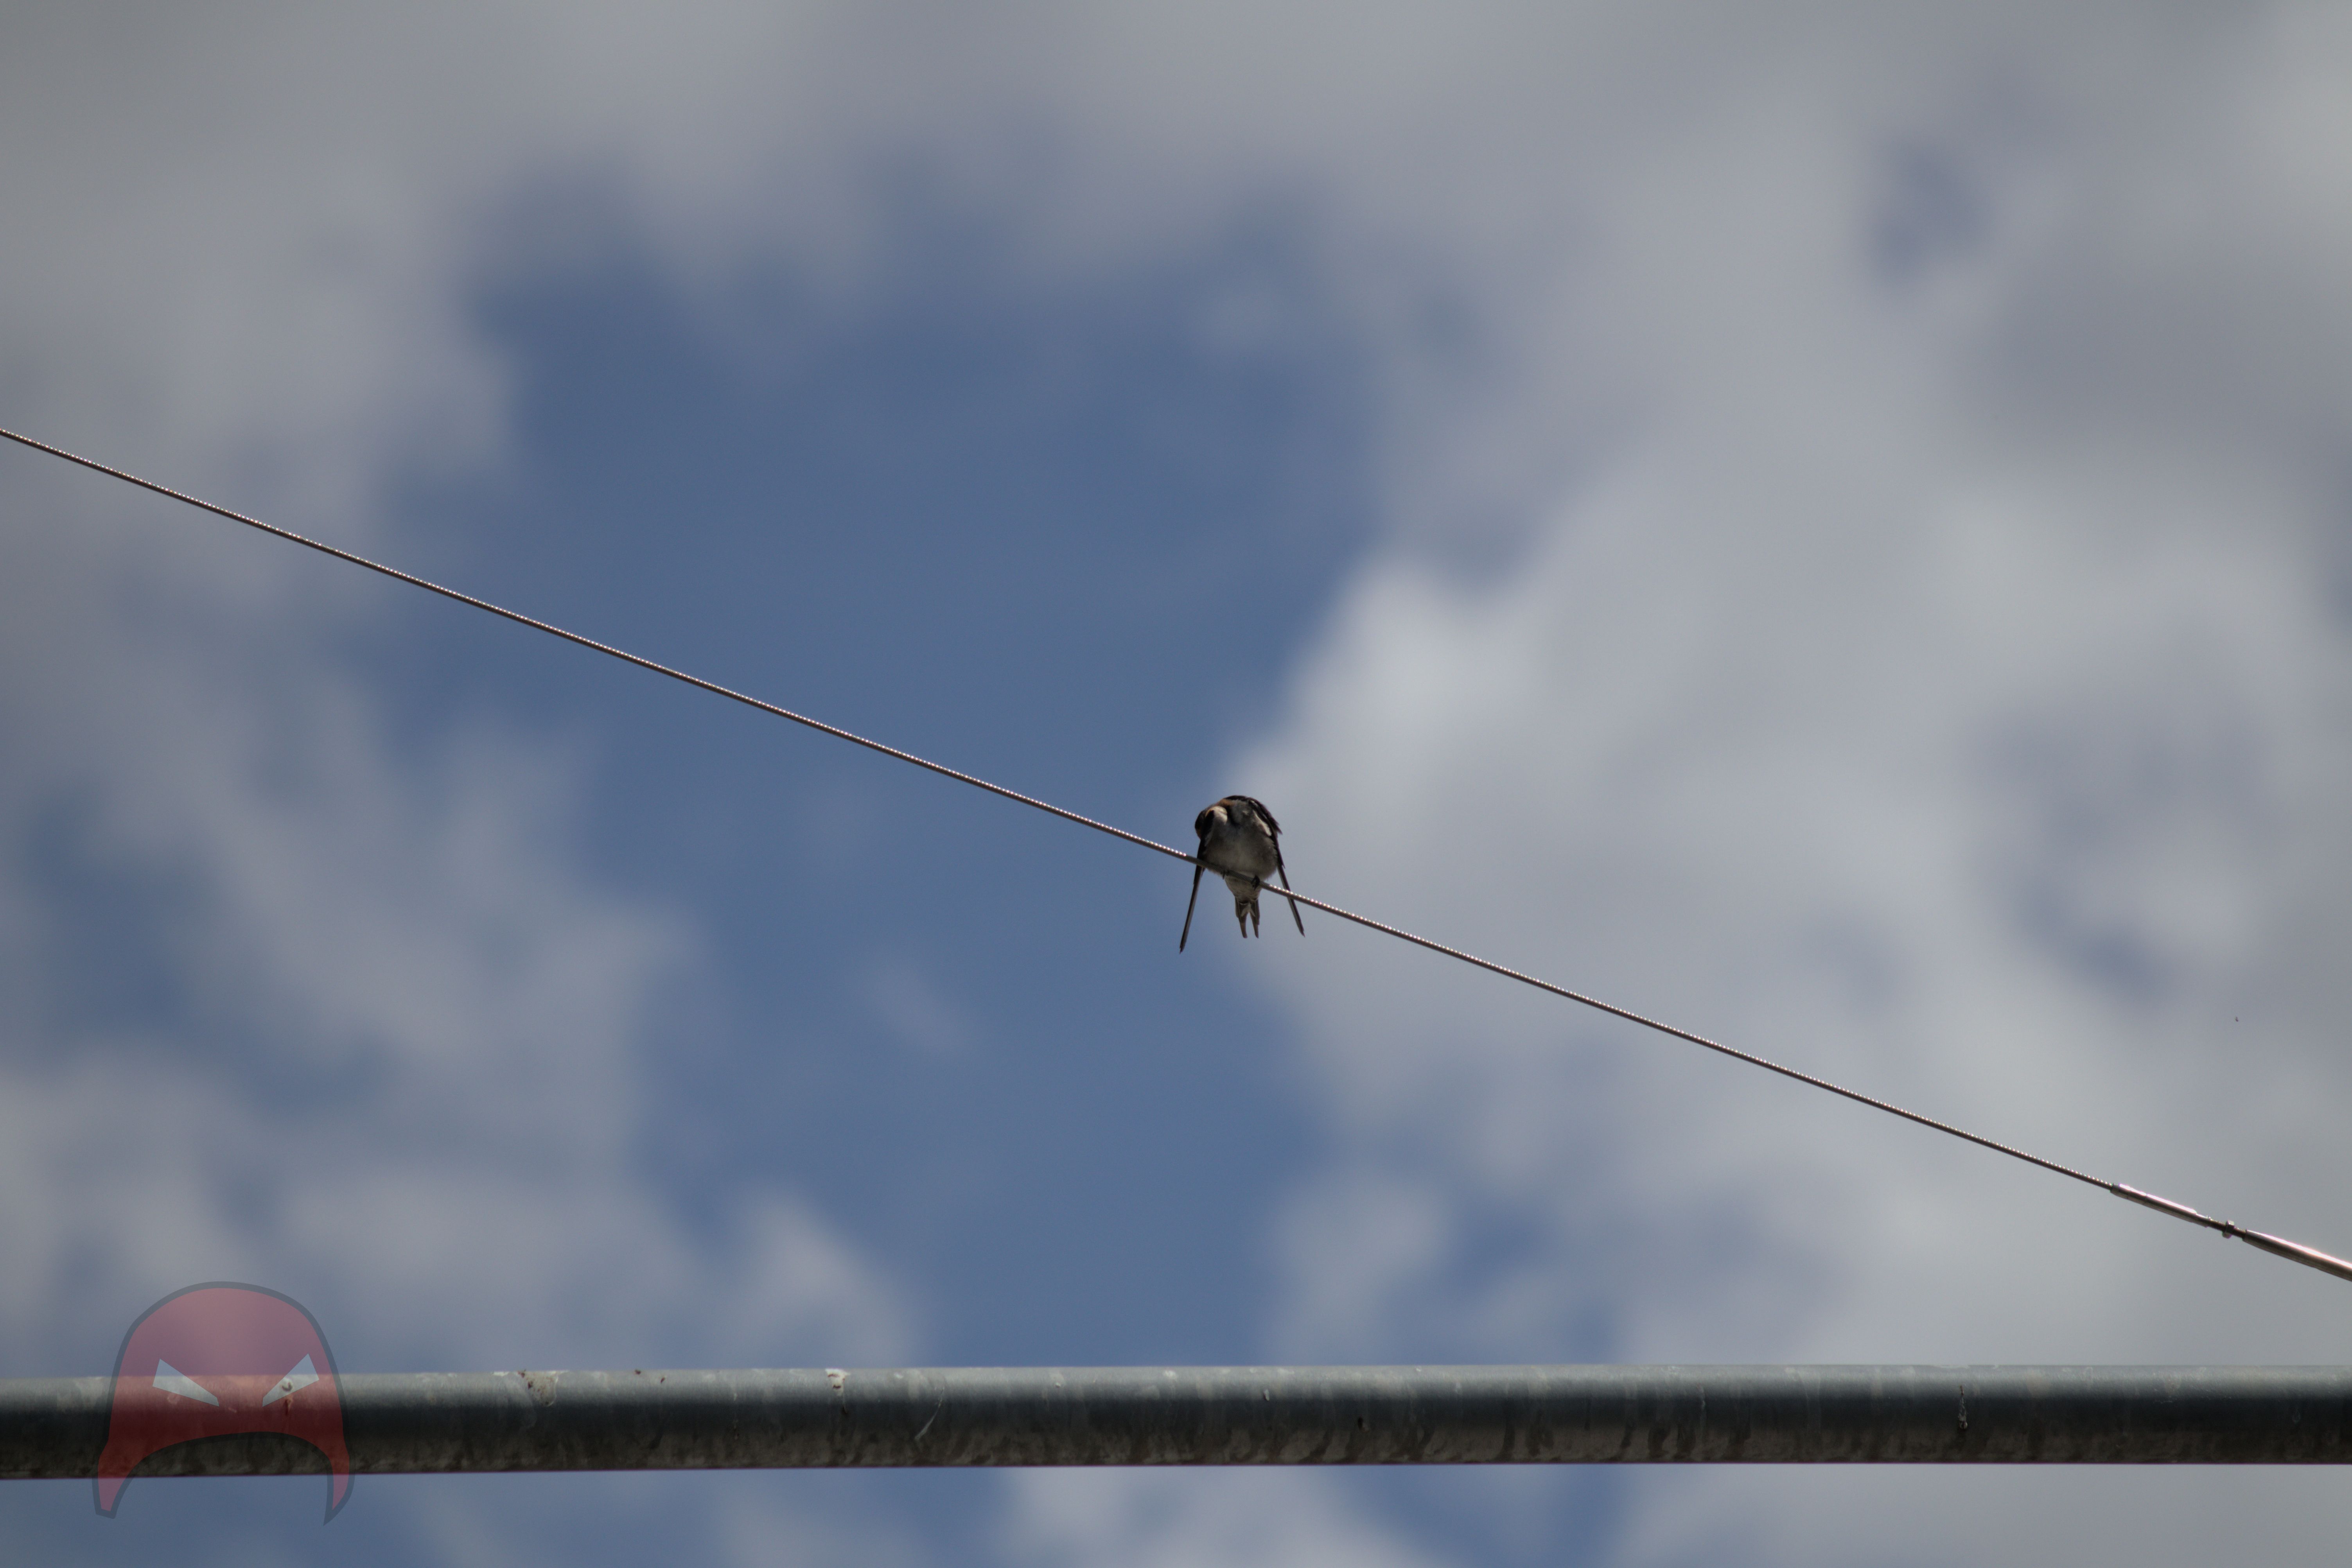 A swallow sits on a wire. Its wings are slightly out to balance itself and it has turned its head so that it can have a scratch. This gives it the appearance of having no head